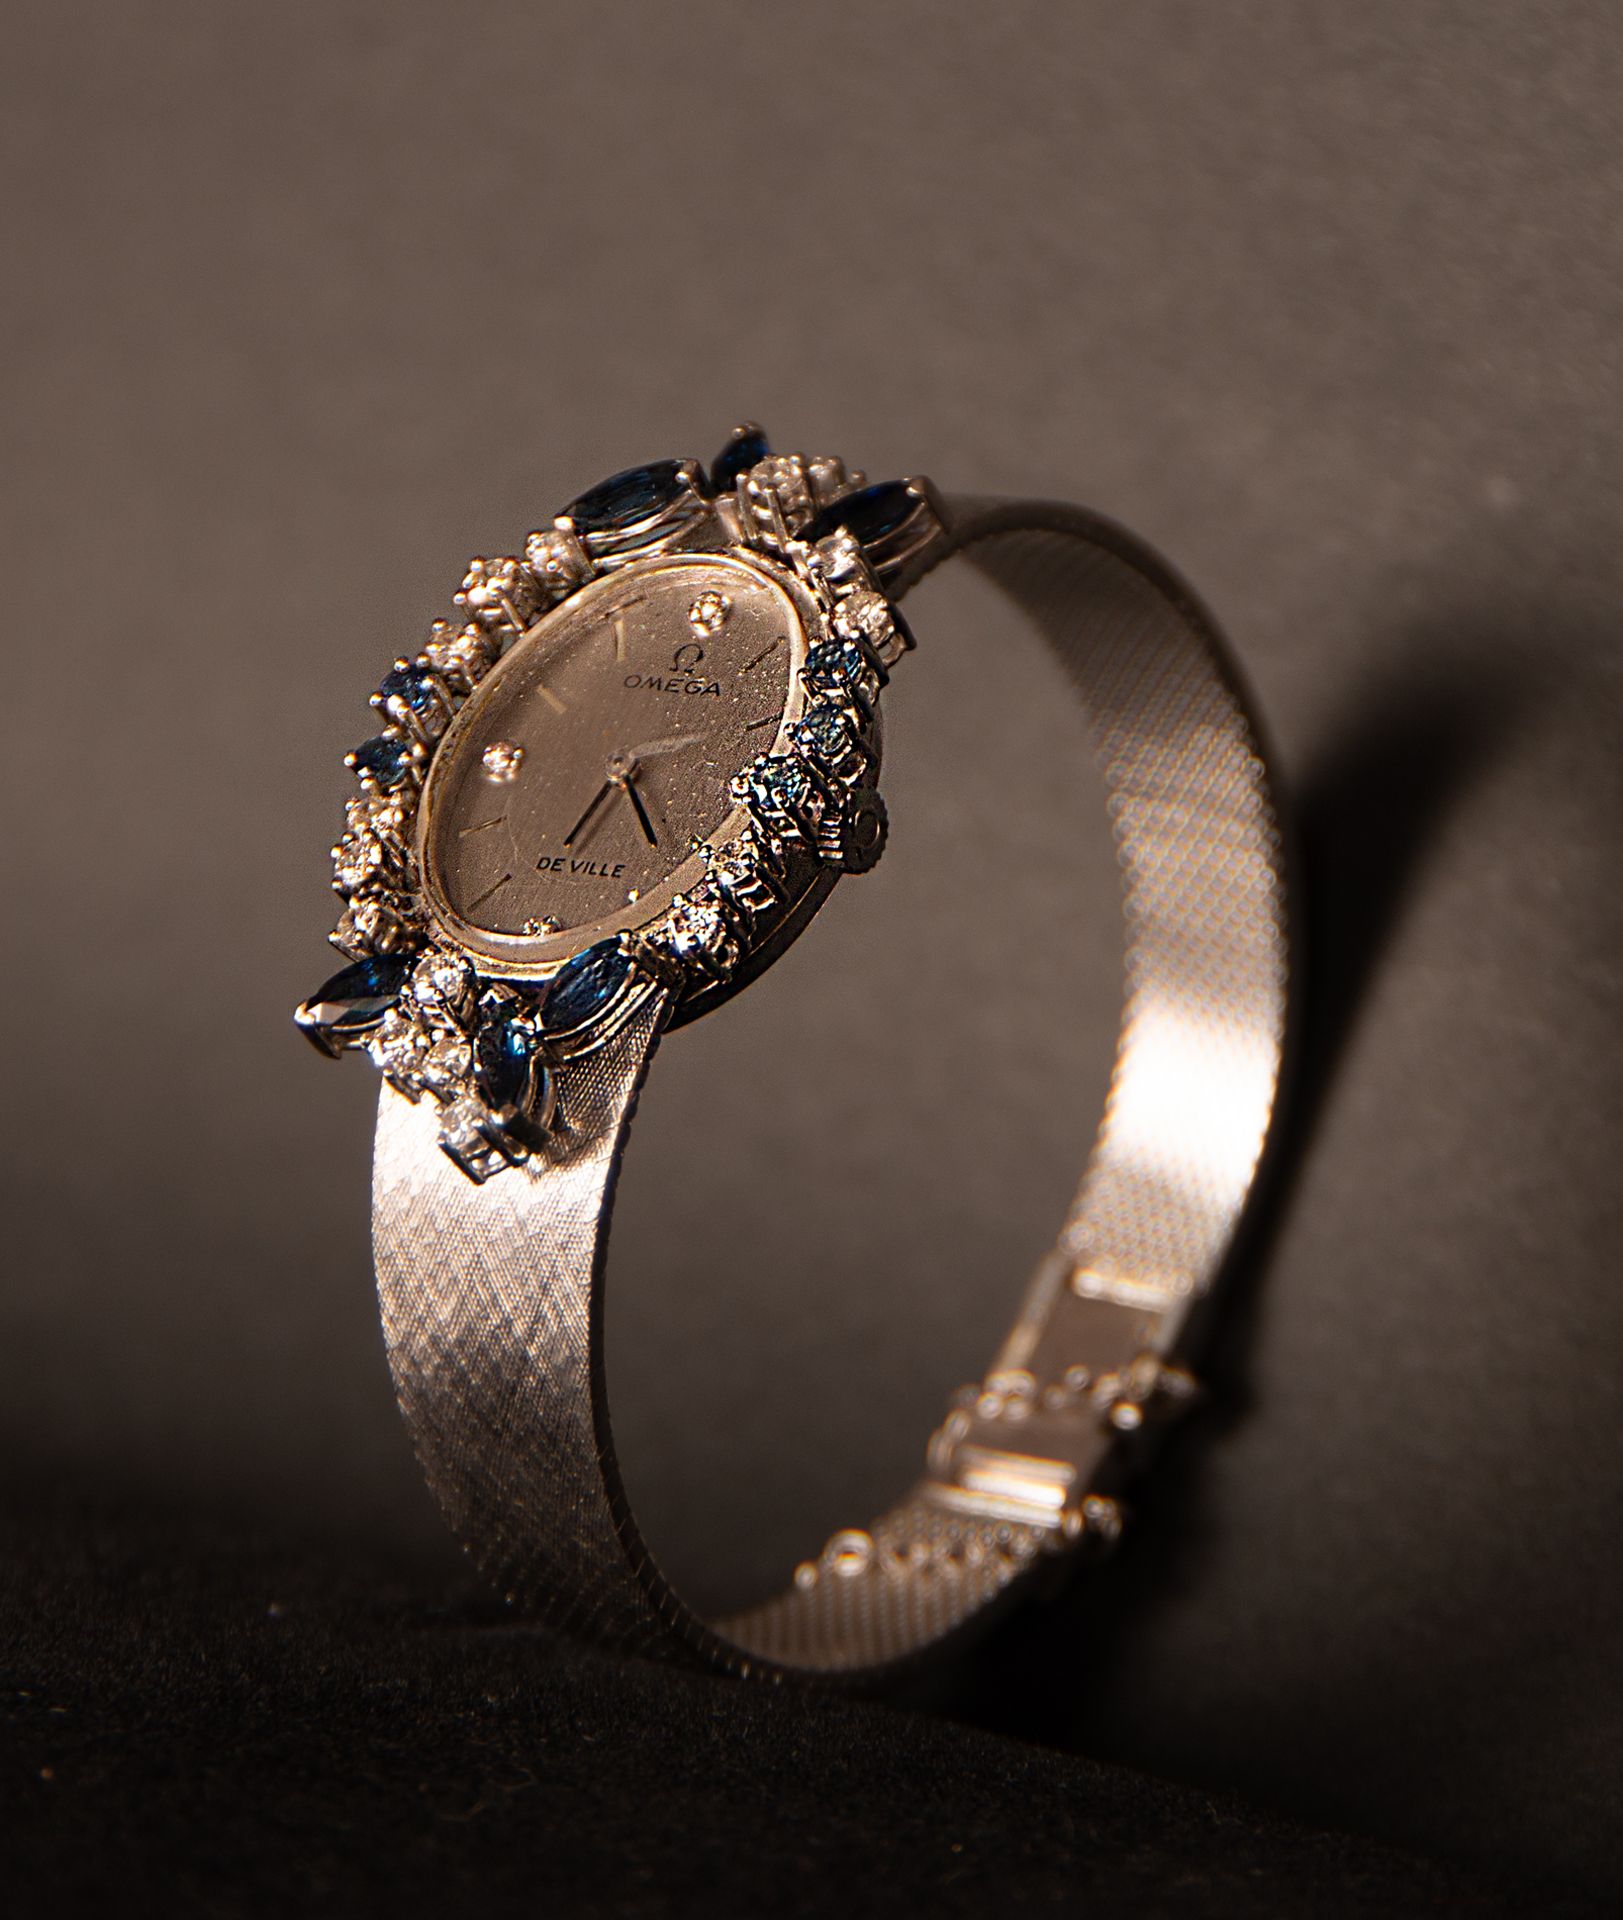 Omega  ladies watch in white gold, sapphires and diamonds, 1950s - Image 4 of 6